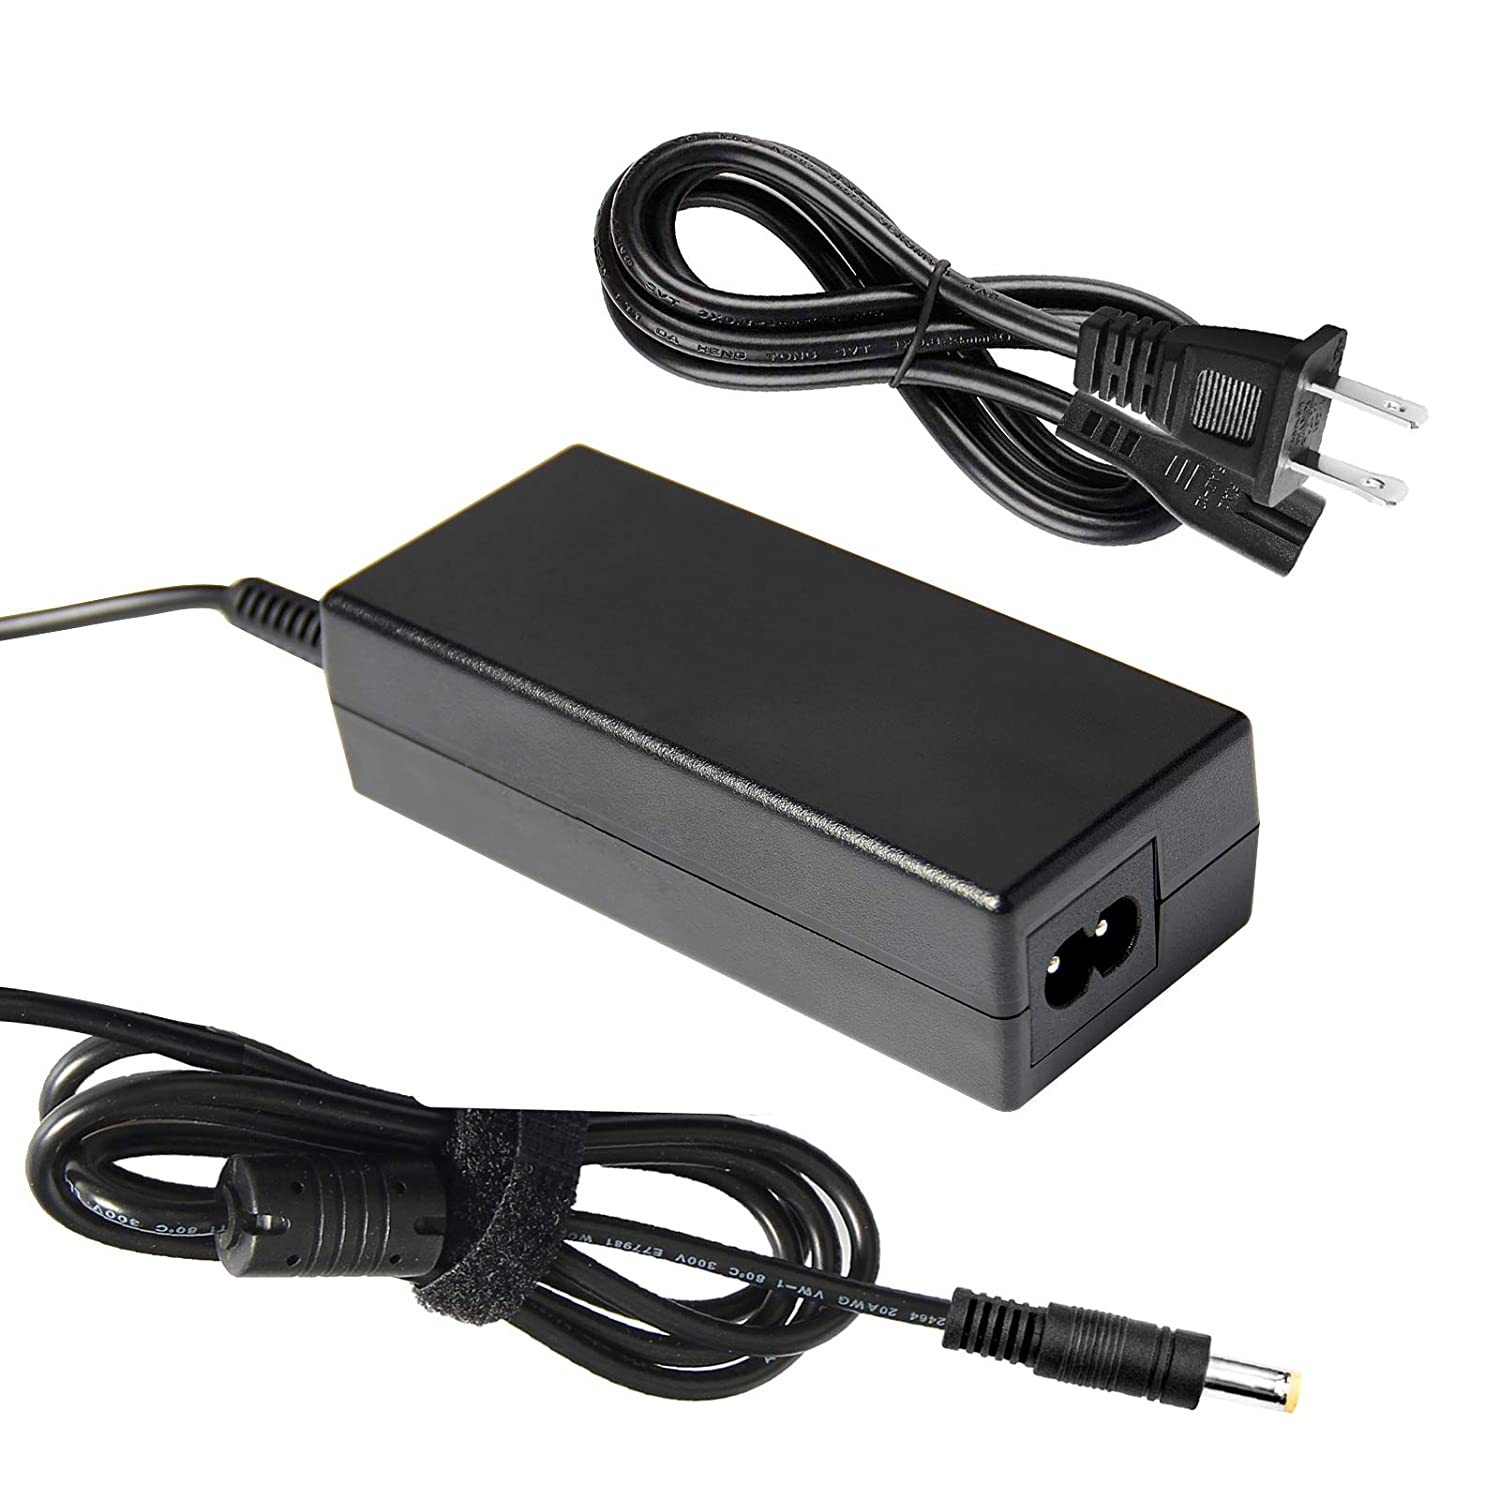 Primary image for ARyee 19V 2.37A AC Adapter Laptop Charger Power Supply for Toshiba Satellite PA3